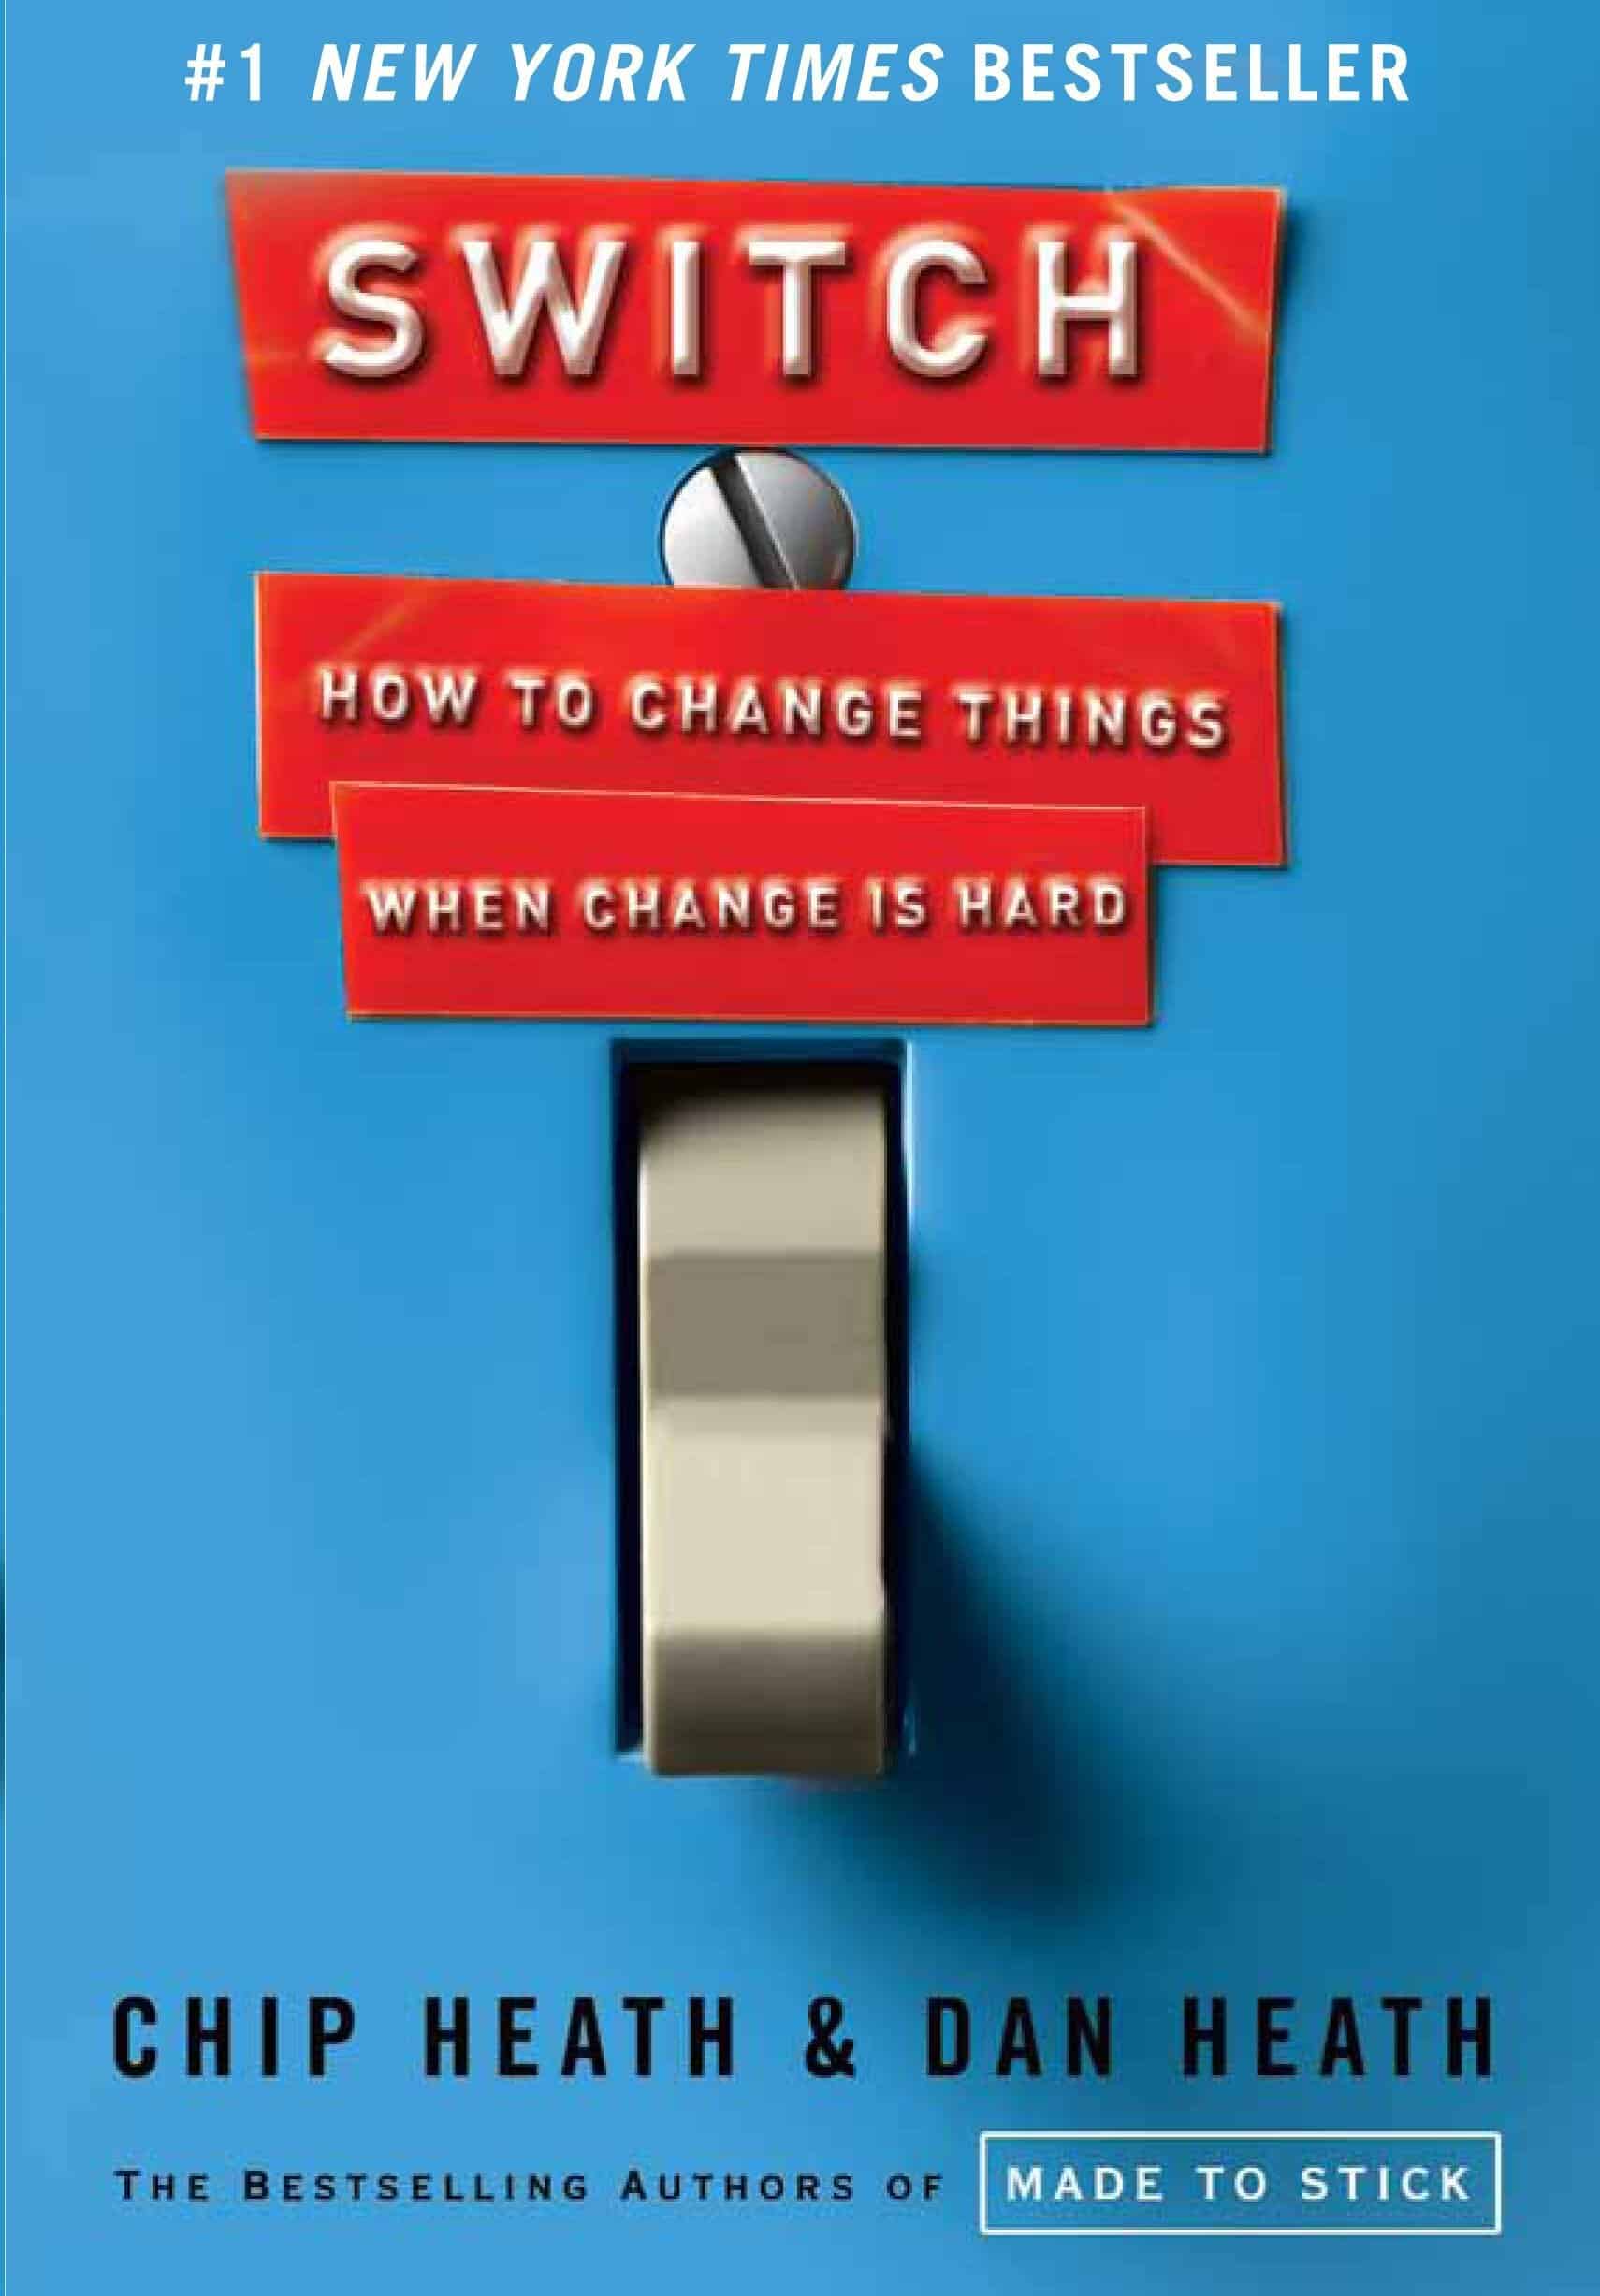 Switch: How to Change Things When Change is Hard, by Chip & Dan Heath - Motivational Book